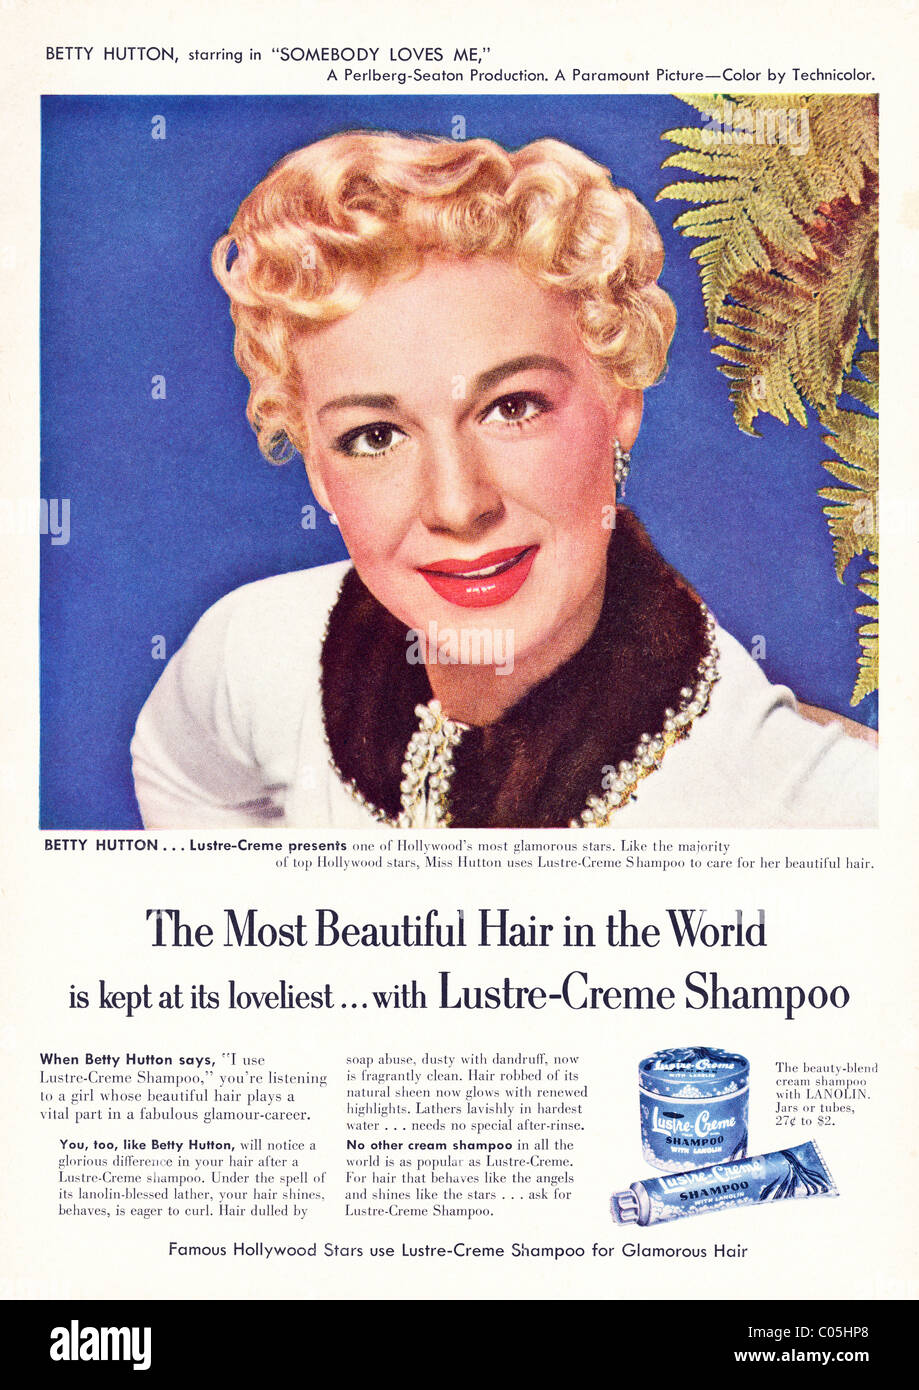 Original 1950s full page advertisement in American consumer magazine for LUSTRE-CREME SHAMPOO with film star BETTY HUTTON Stock Photo